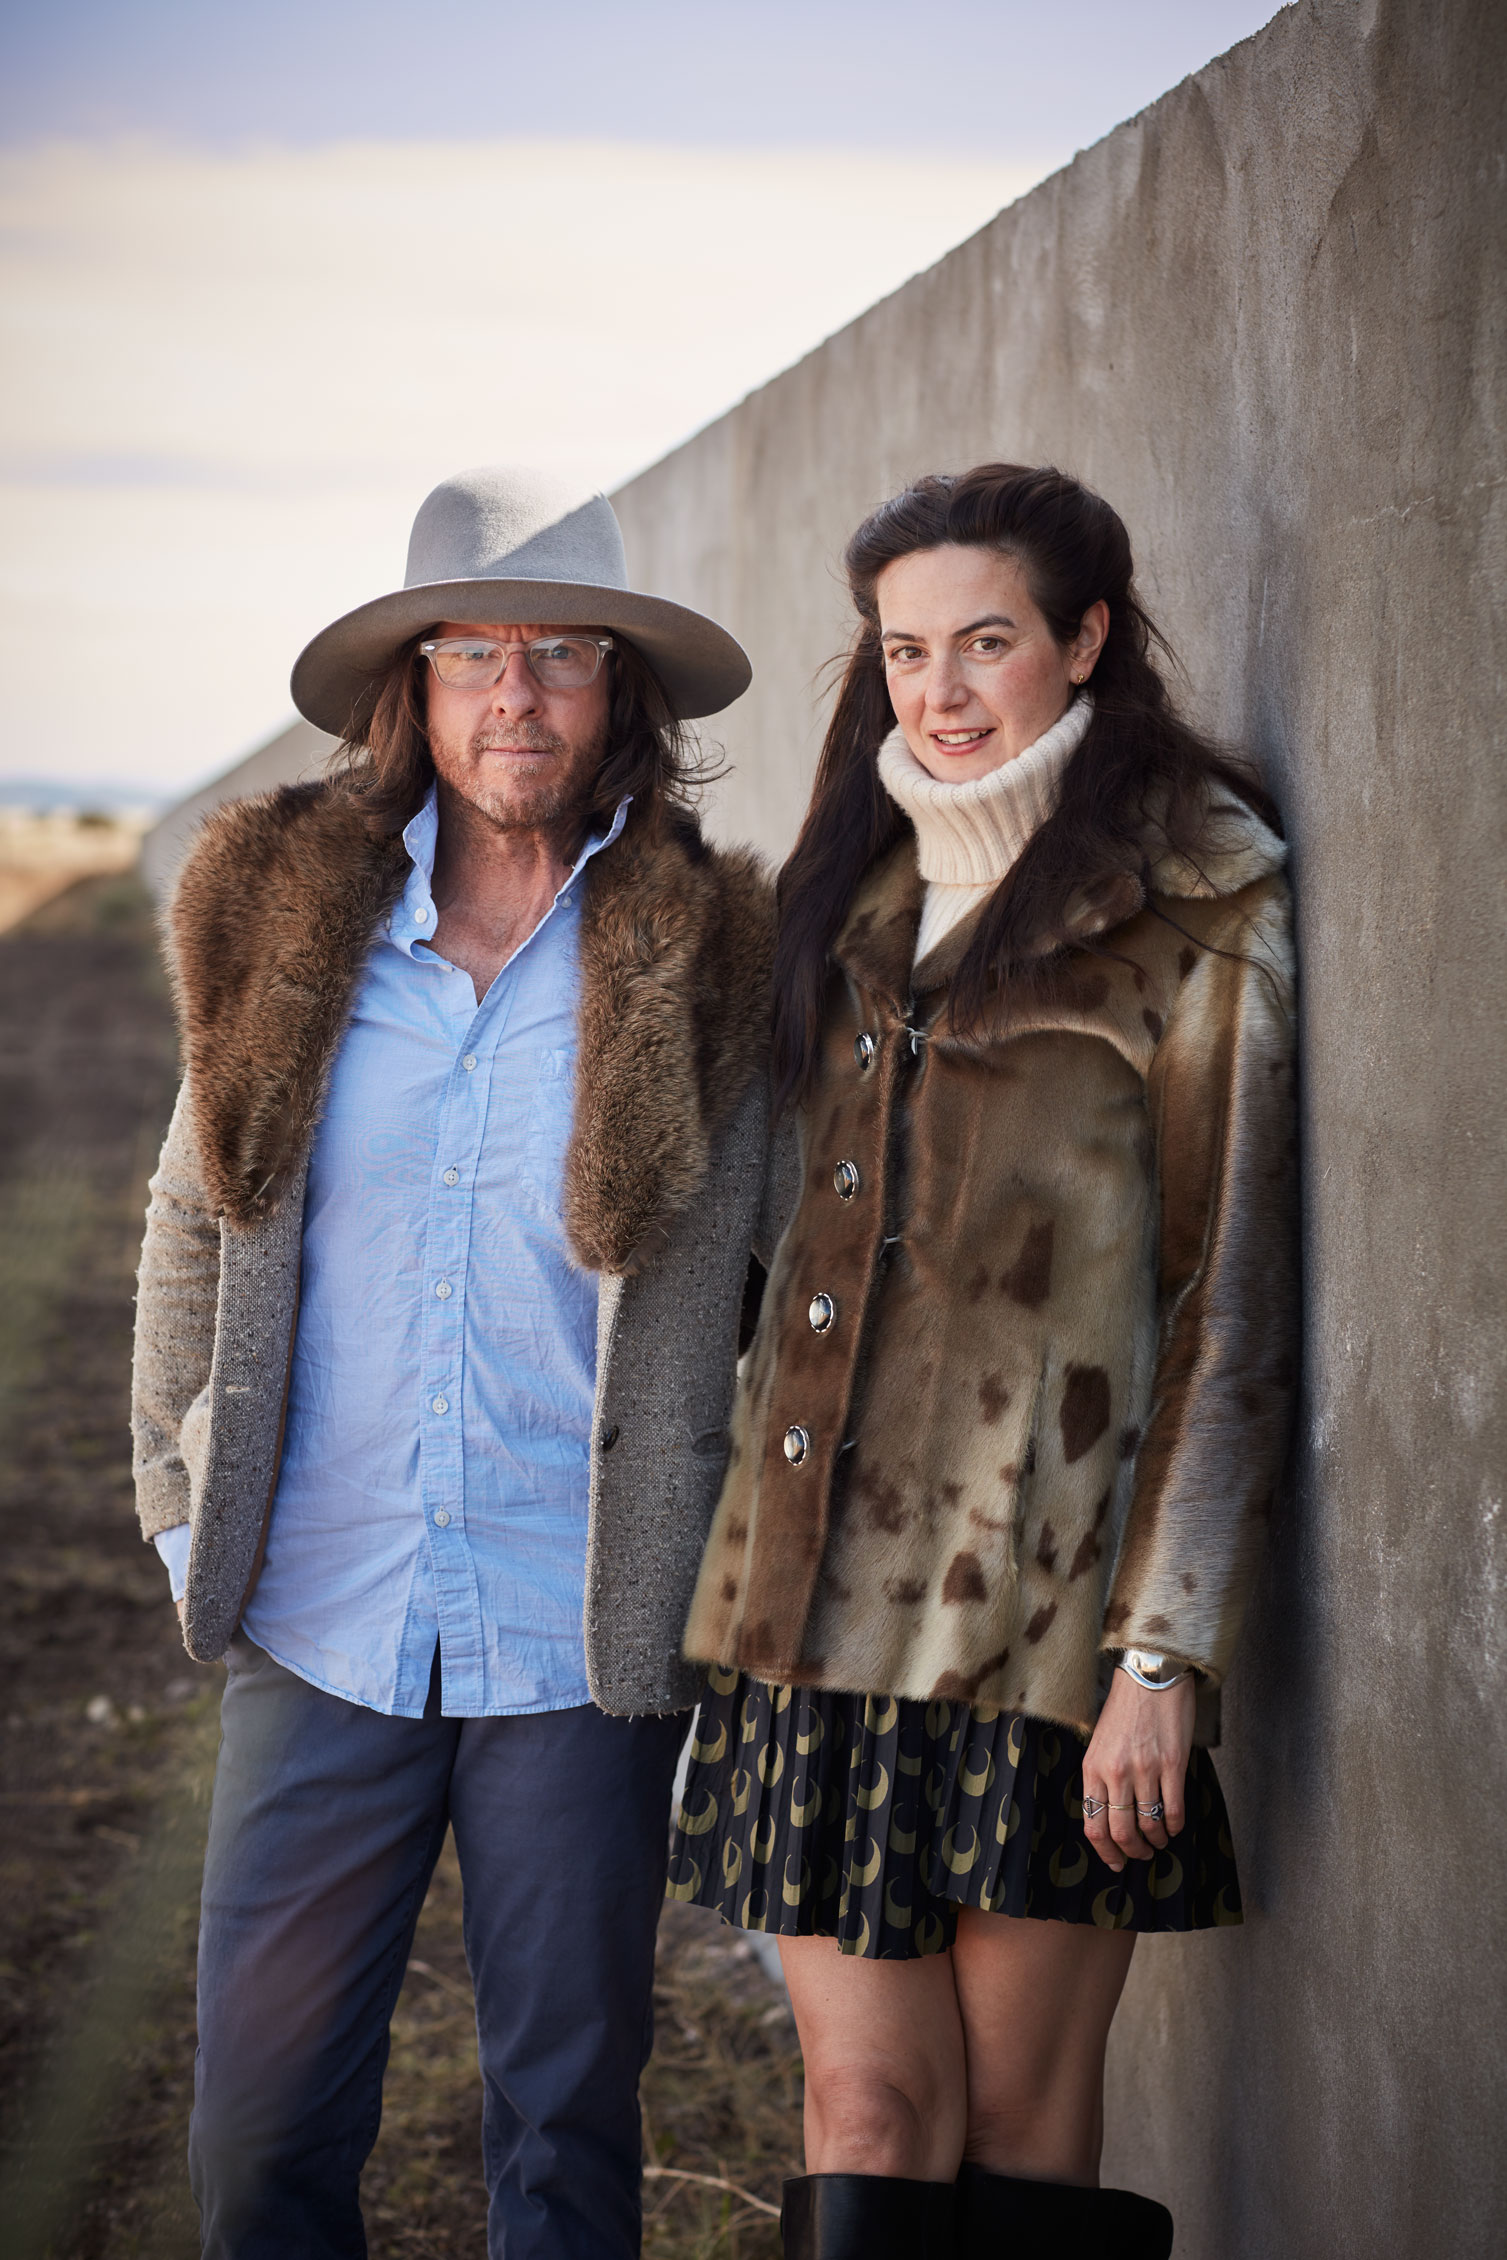 Marfa Invitational founder Michael Phelan and his wife Melissa Bent, who is on MI’s board of advisors.